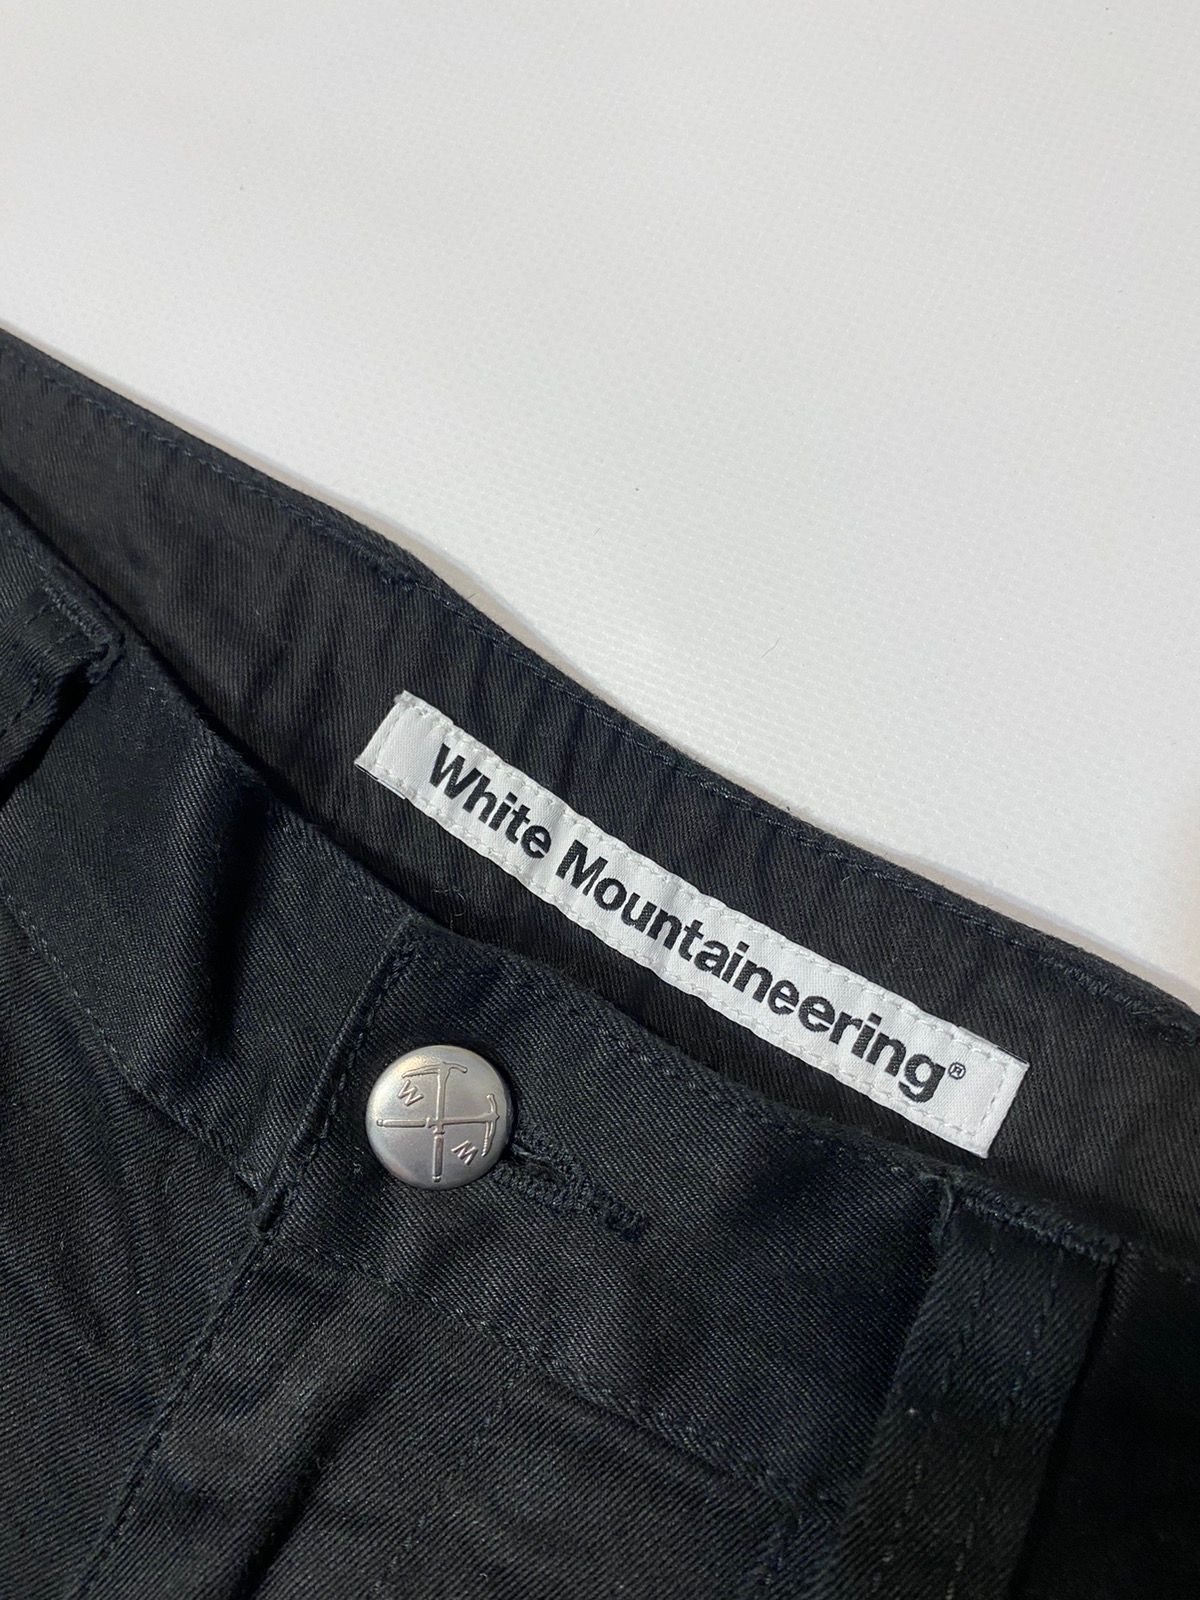 White Mountaineering MADE IN JAPAN White Moutaineering Casual Black Pants Size US 34 / EU 50 - 2 Preview